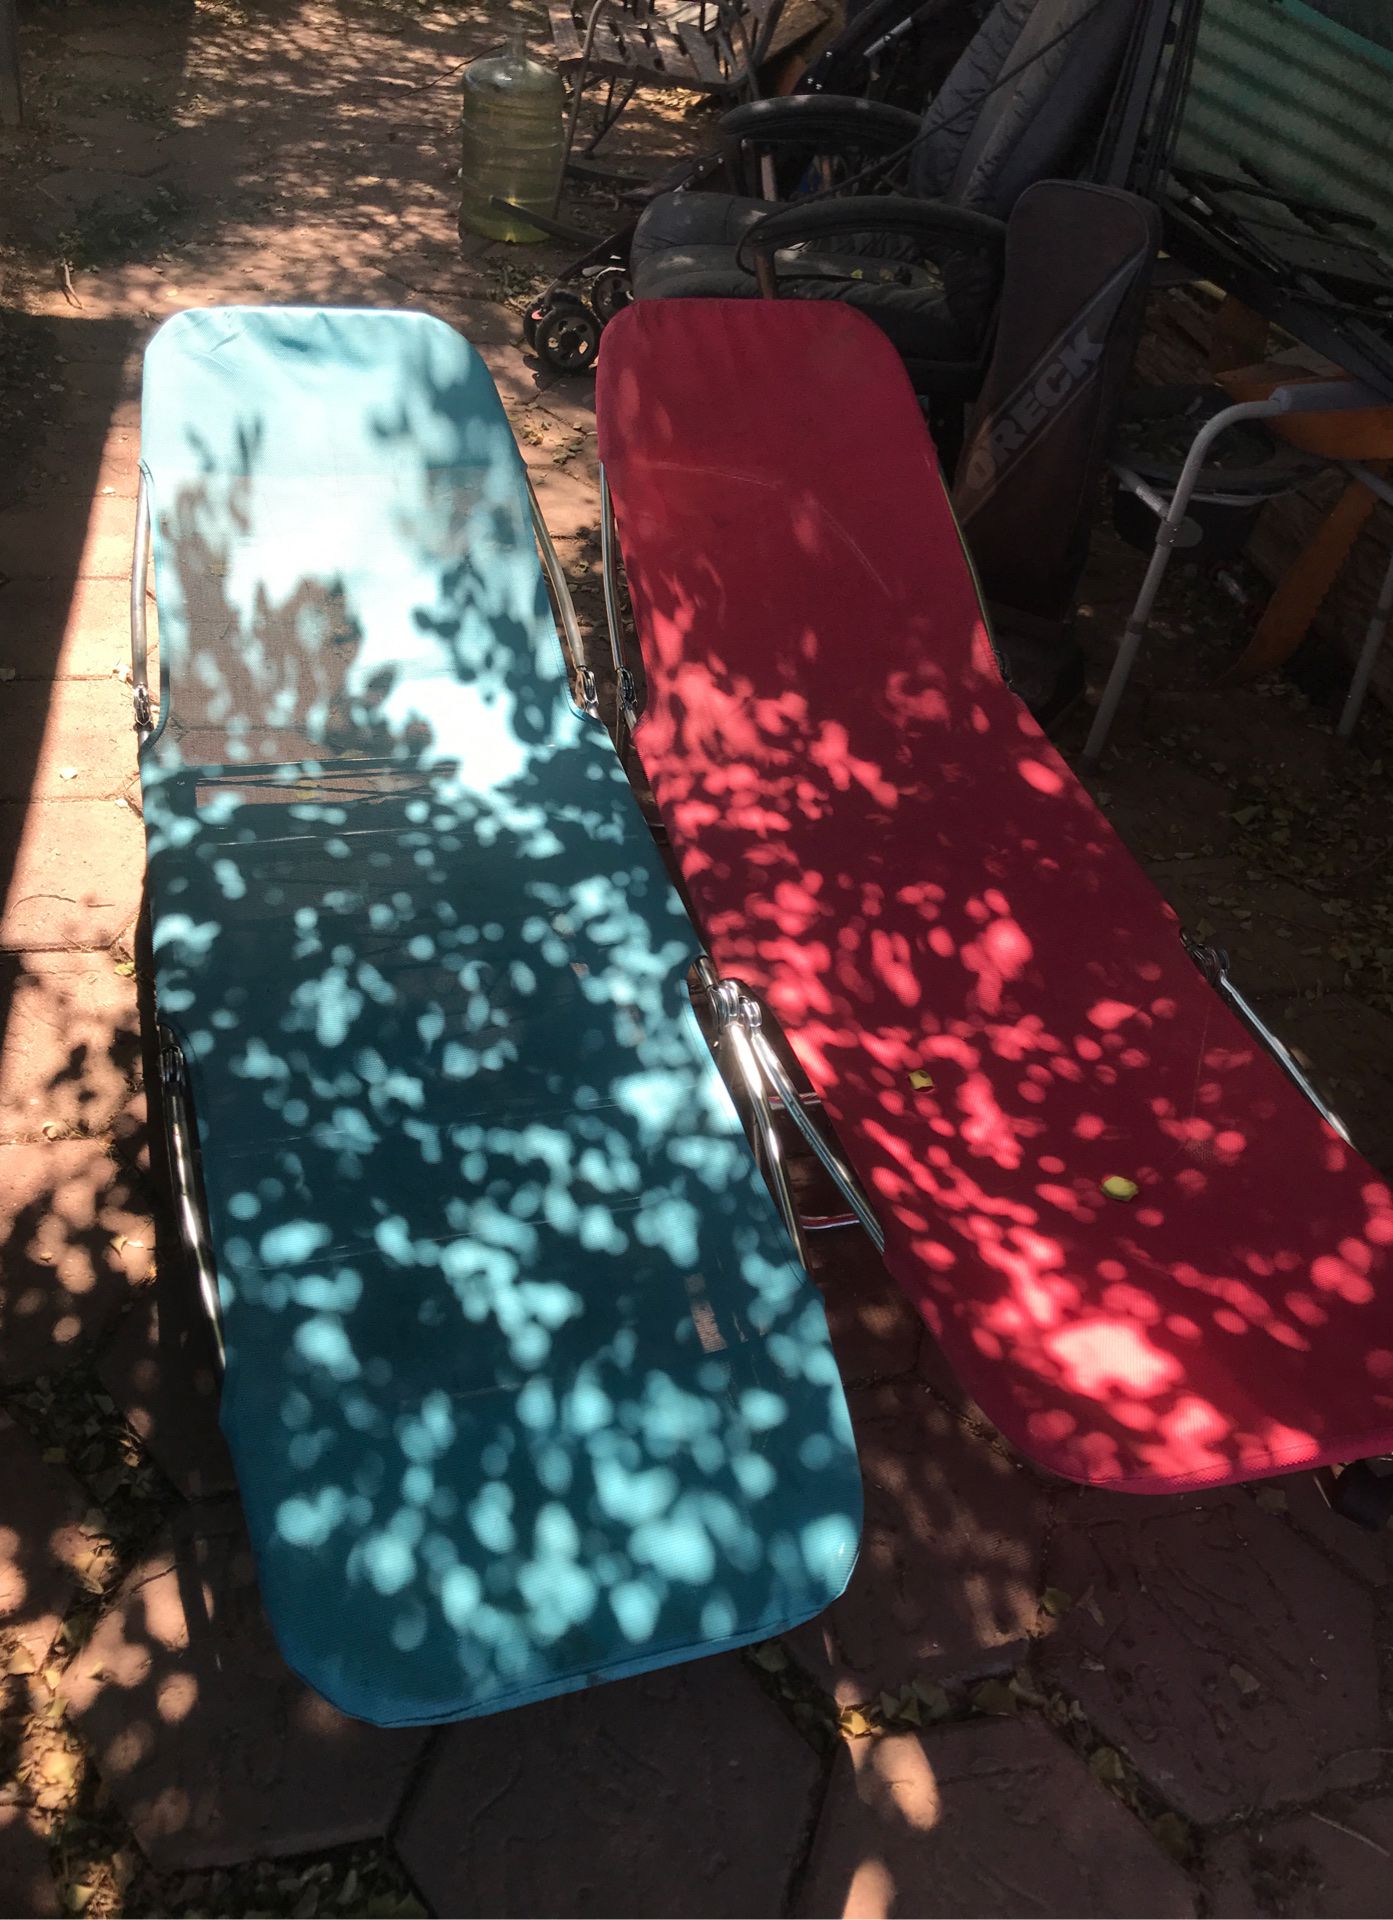 Two camping cots